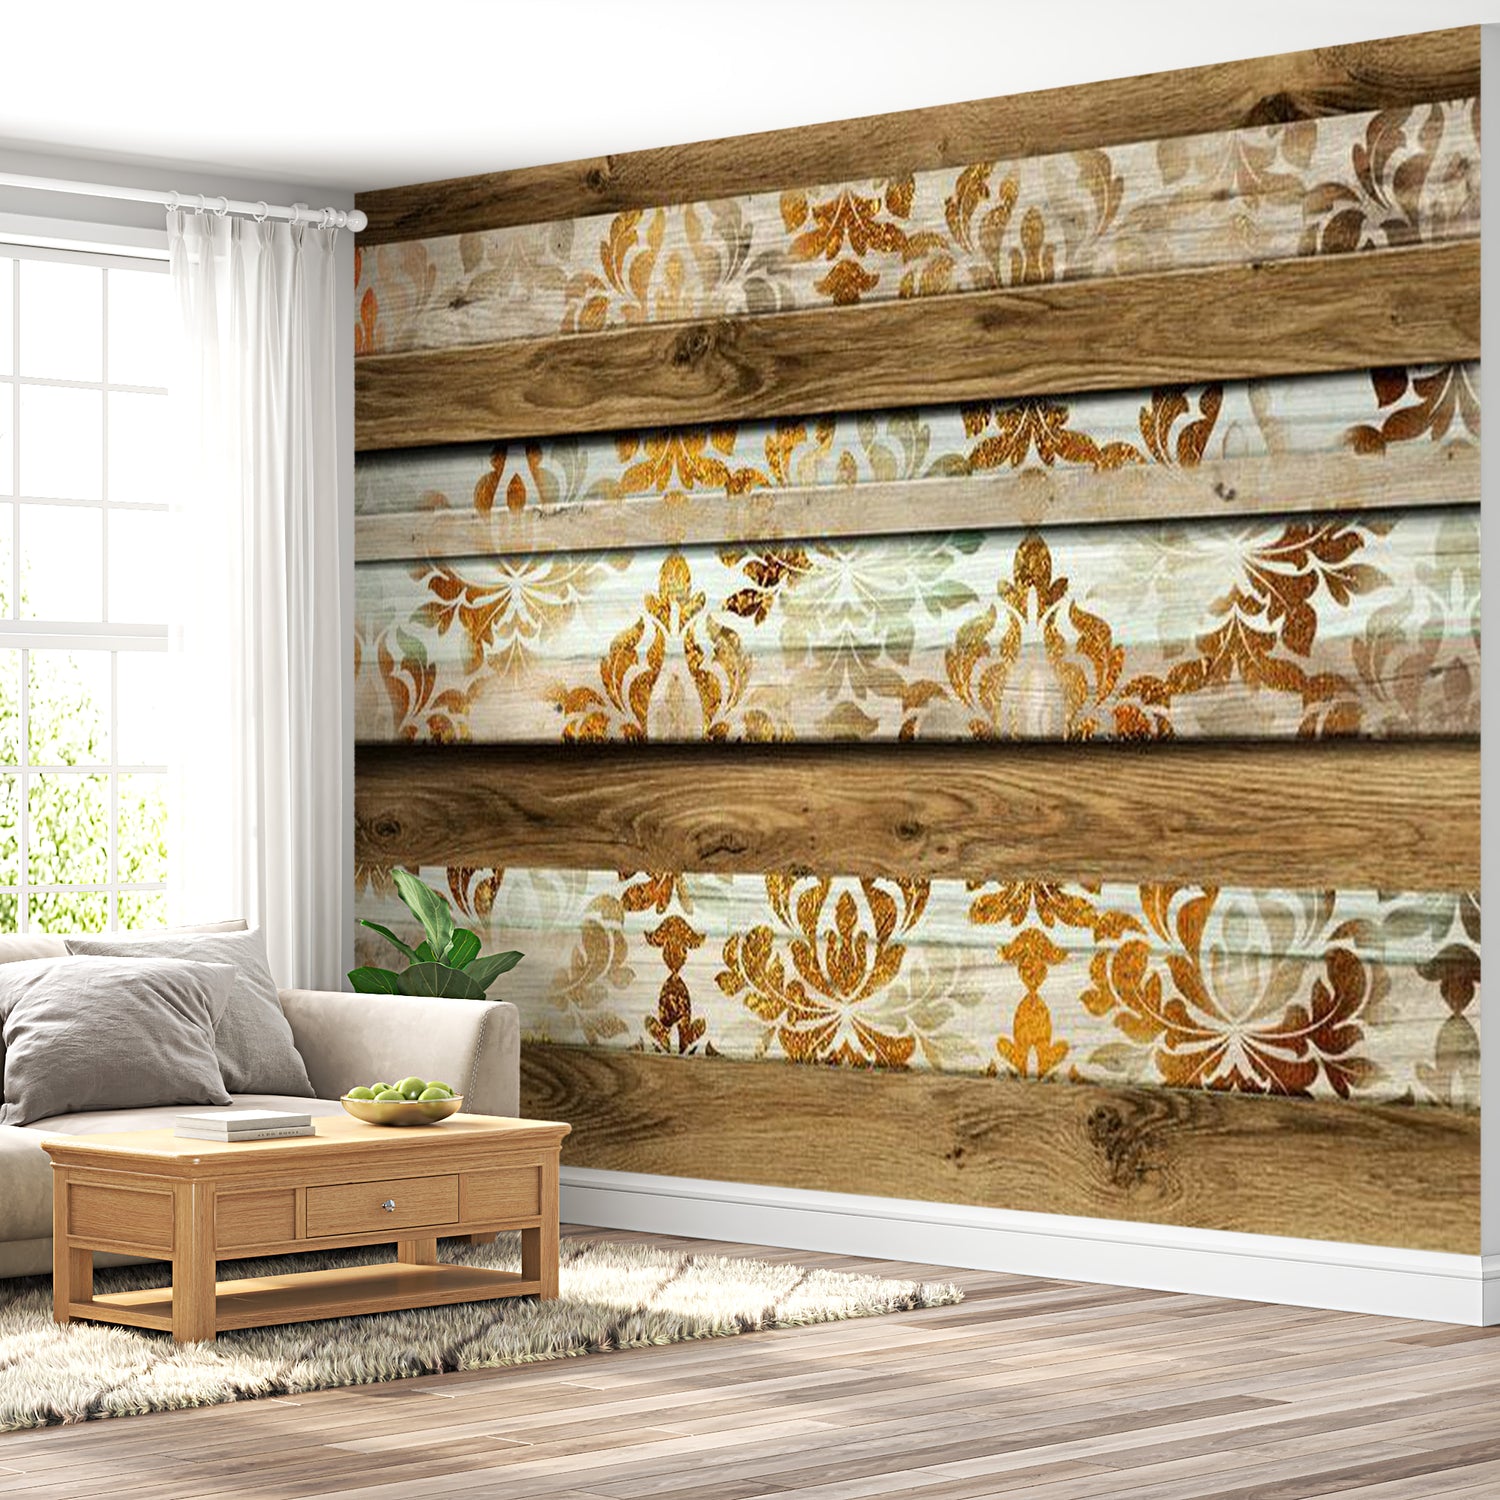 Peel & Stick XXL Wall Mural - Baroque on Wood - Removable Wall Decals